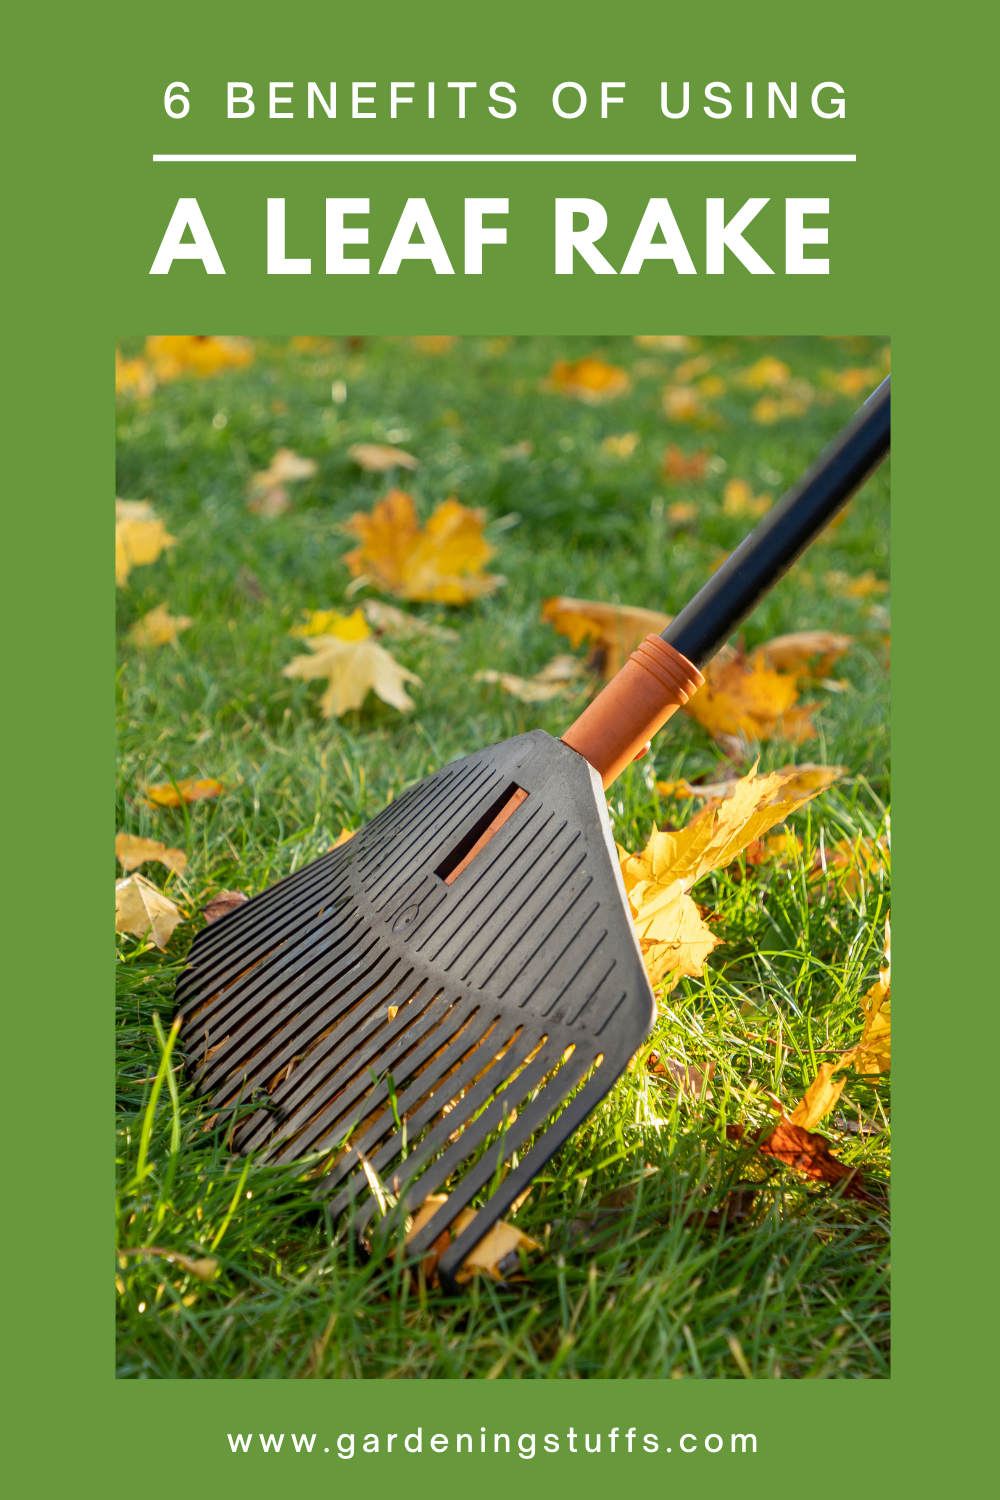 A lot of people would like to keep their garden or lawn clean. This is why you need a leaf rake to make your cleaning work easy. Read on and discover the benefits of using a leaf rake and our list for test leaf rake reviews available on the market.